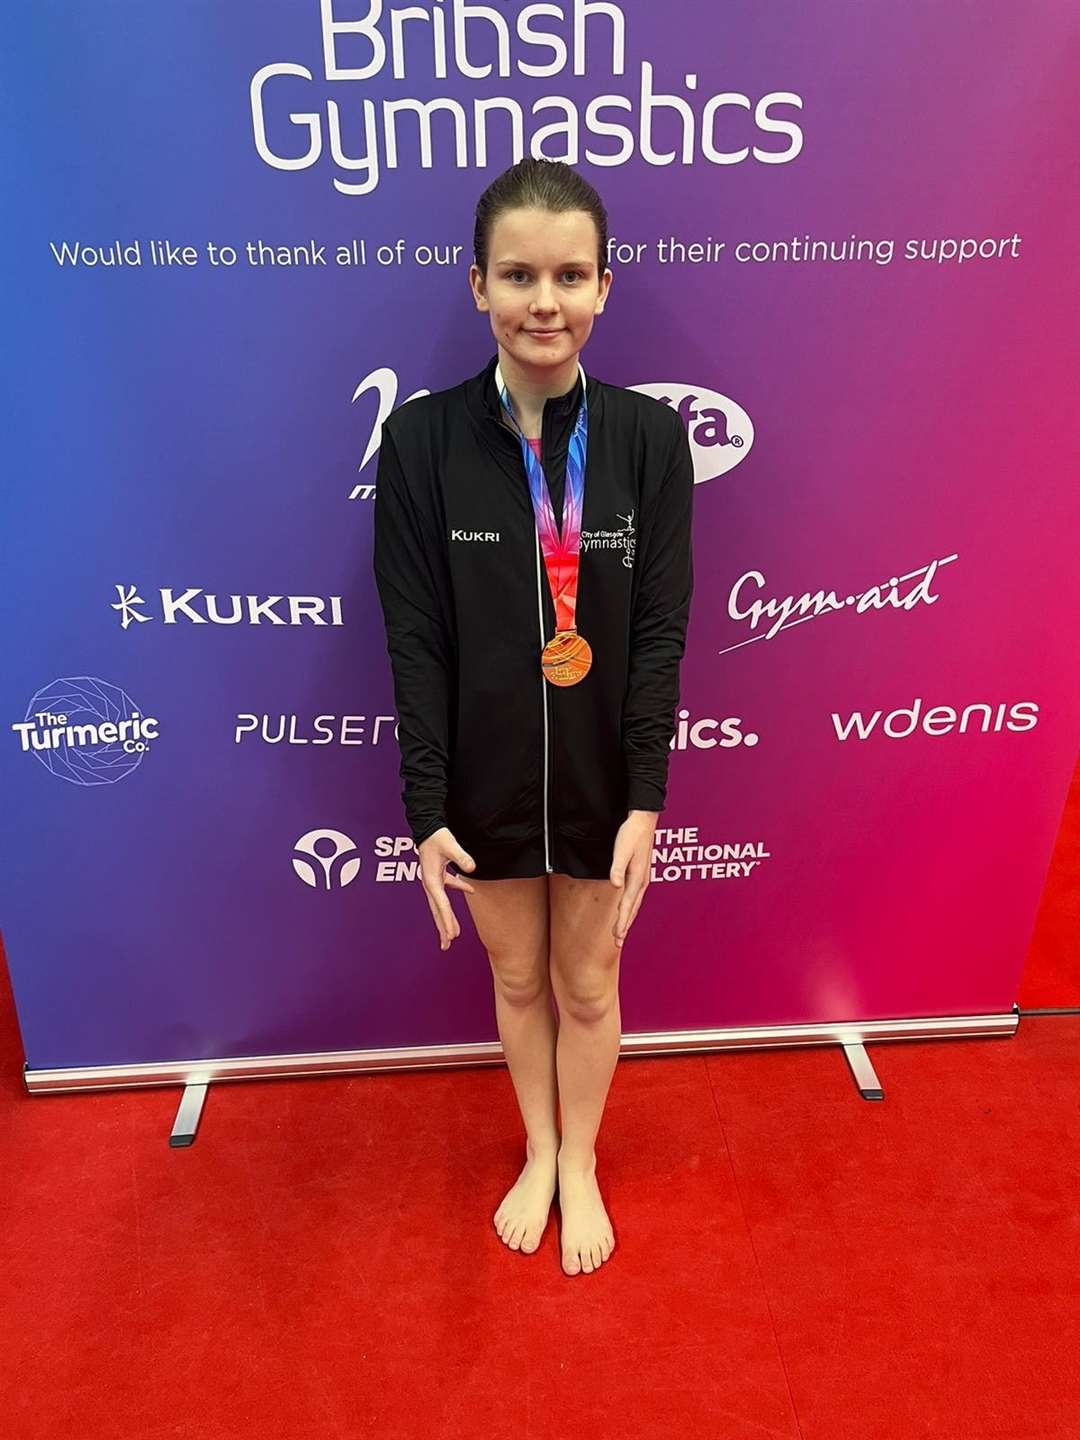 Carol Ball (16) won the gold medal in vault in her category – class 1 women's senior – at the 2023 Artistic Disability British Championships, held at Lilleshall National Sports Centre, near Newport, Shropshire, on Sunday, October 1.